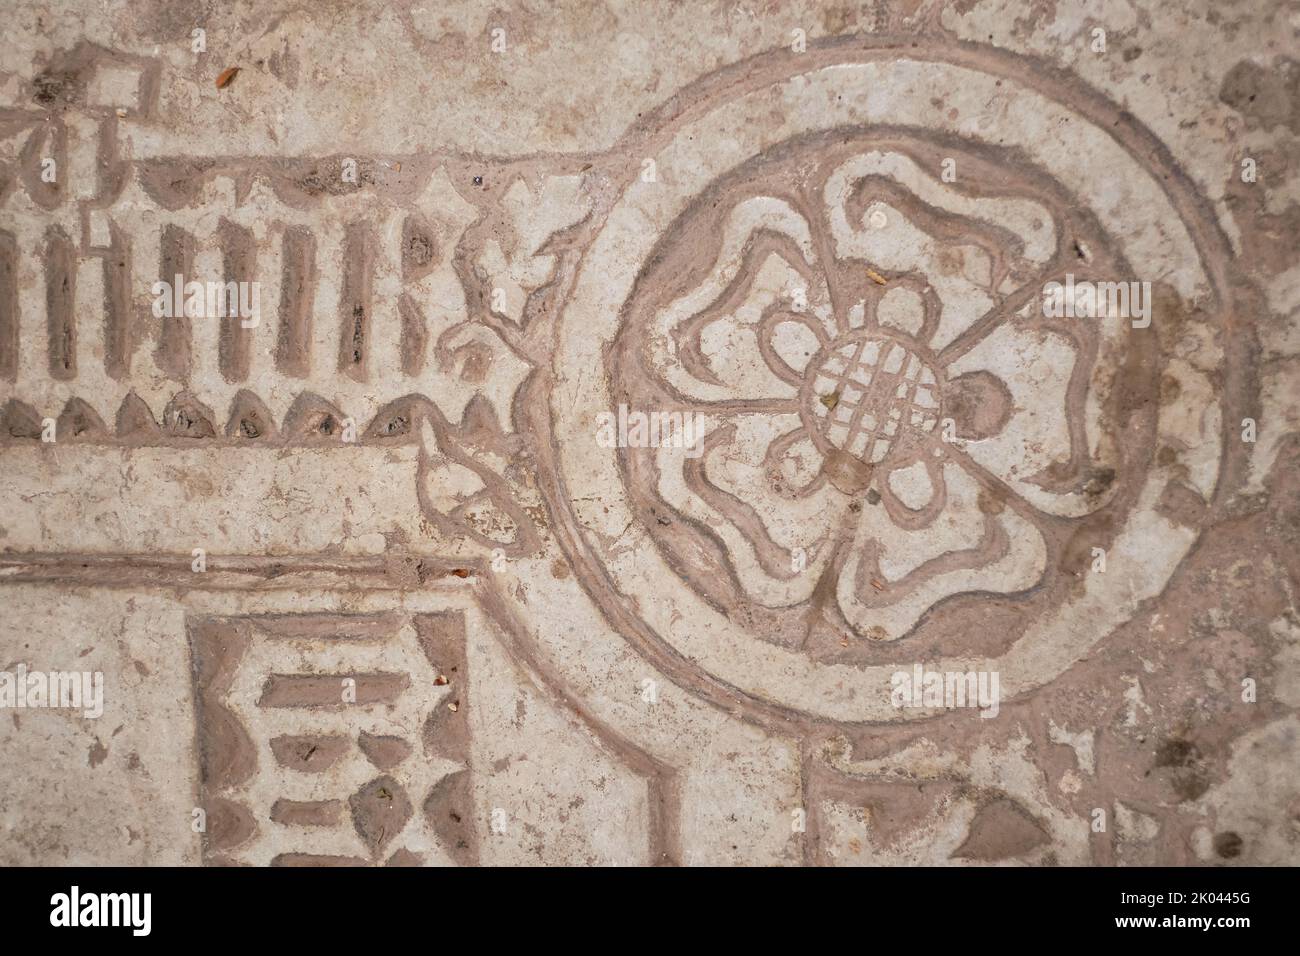 Carved symbol of a five-petaled rose with a globe on a stone tomb slab or epitaph. Stock Photo